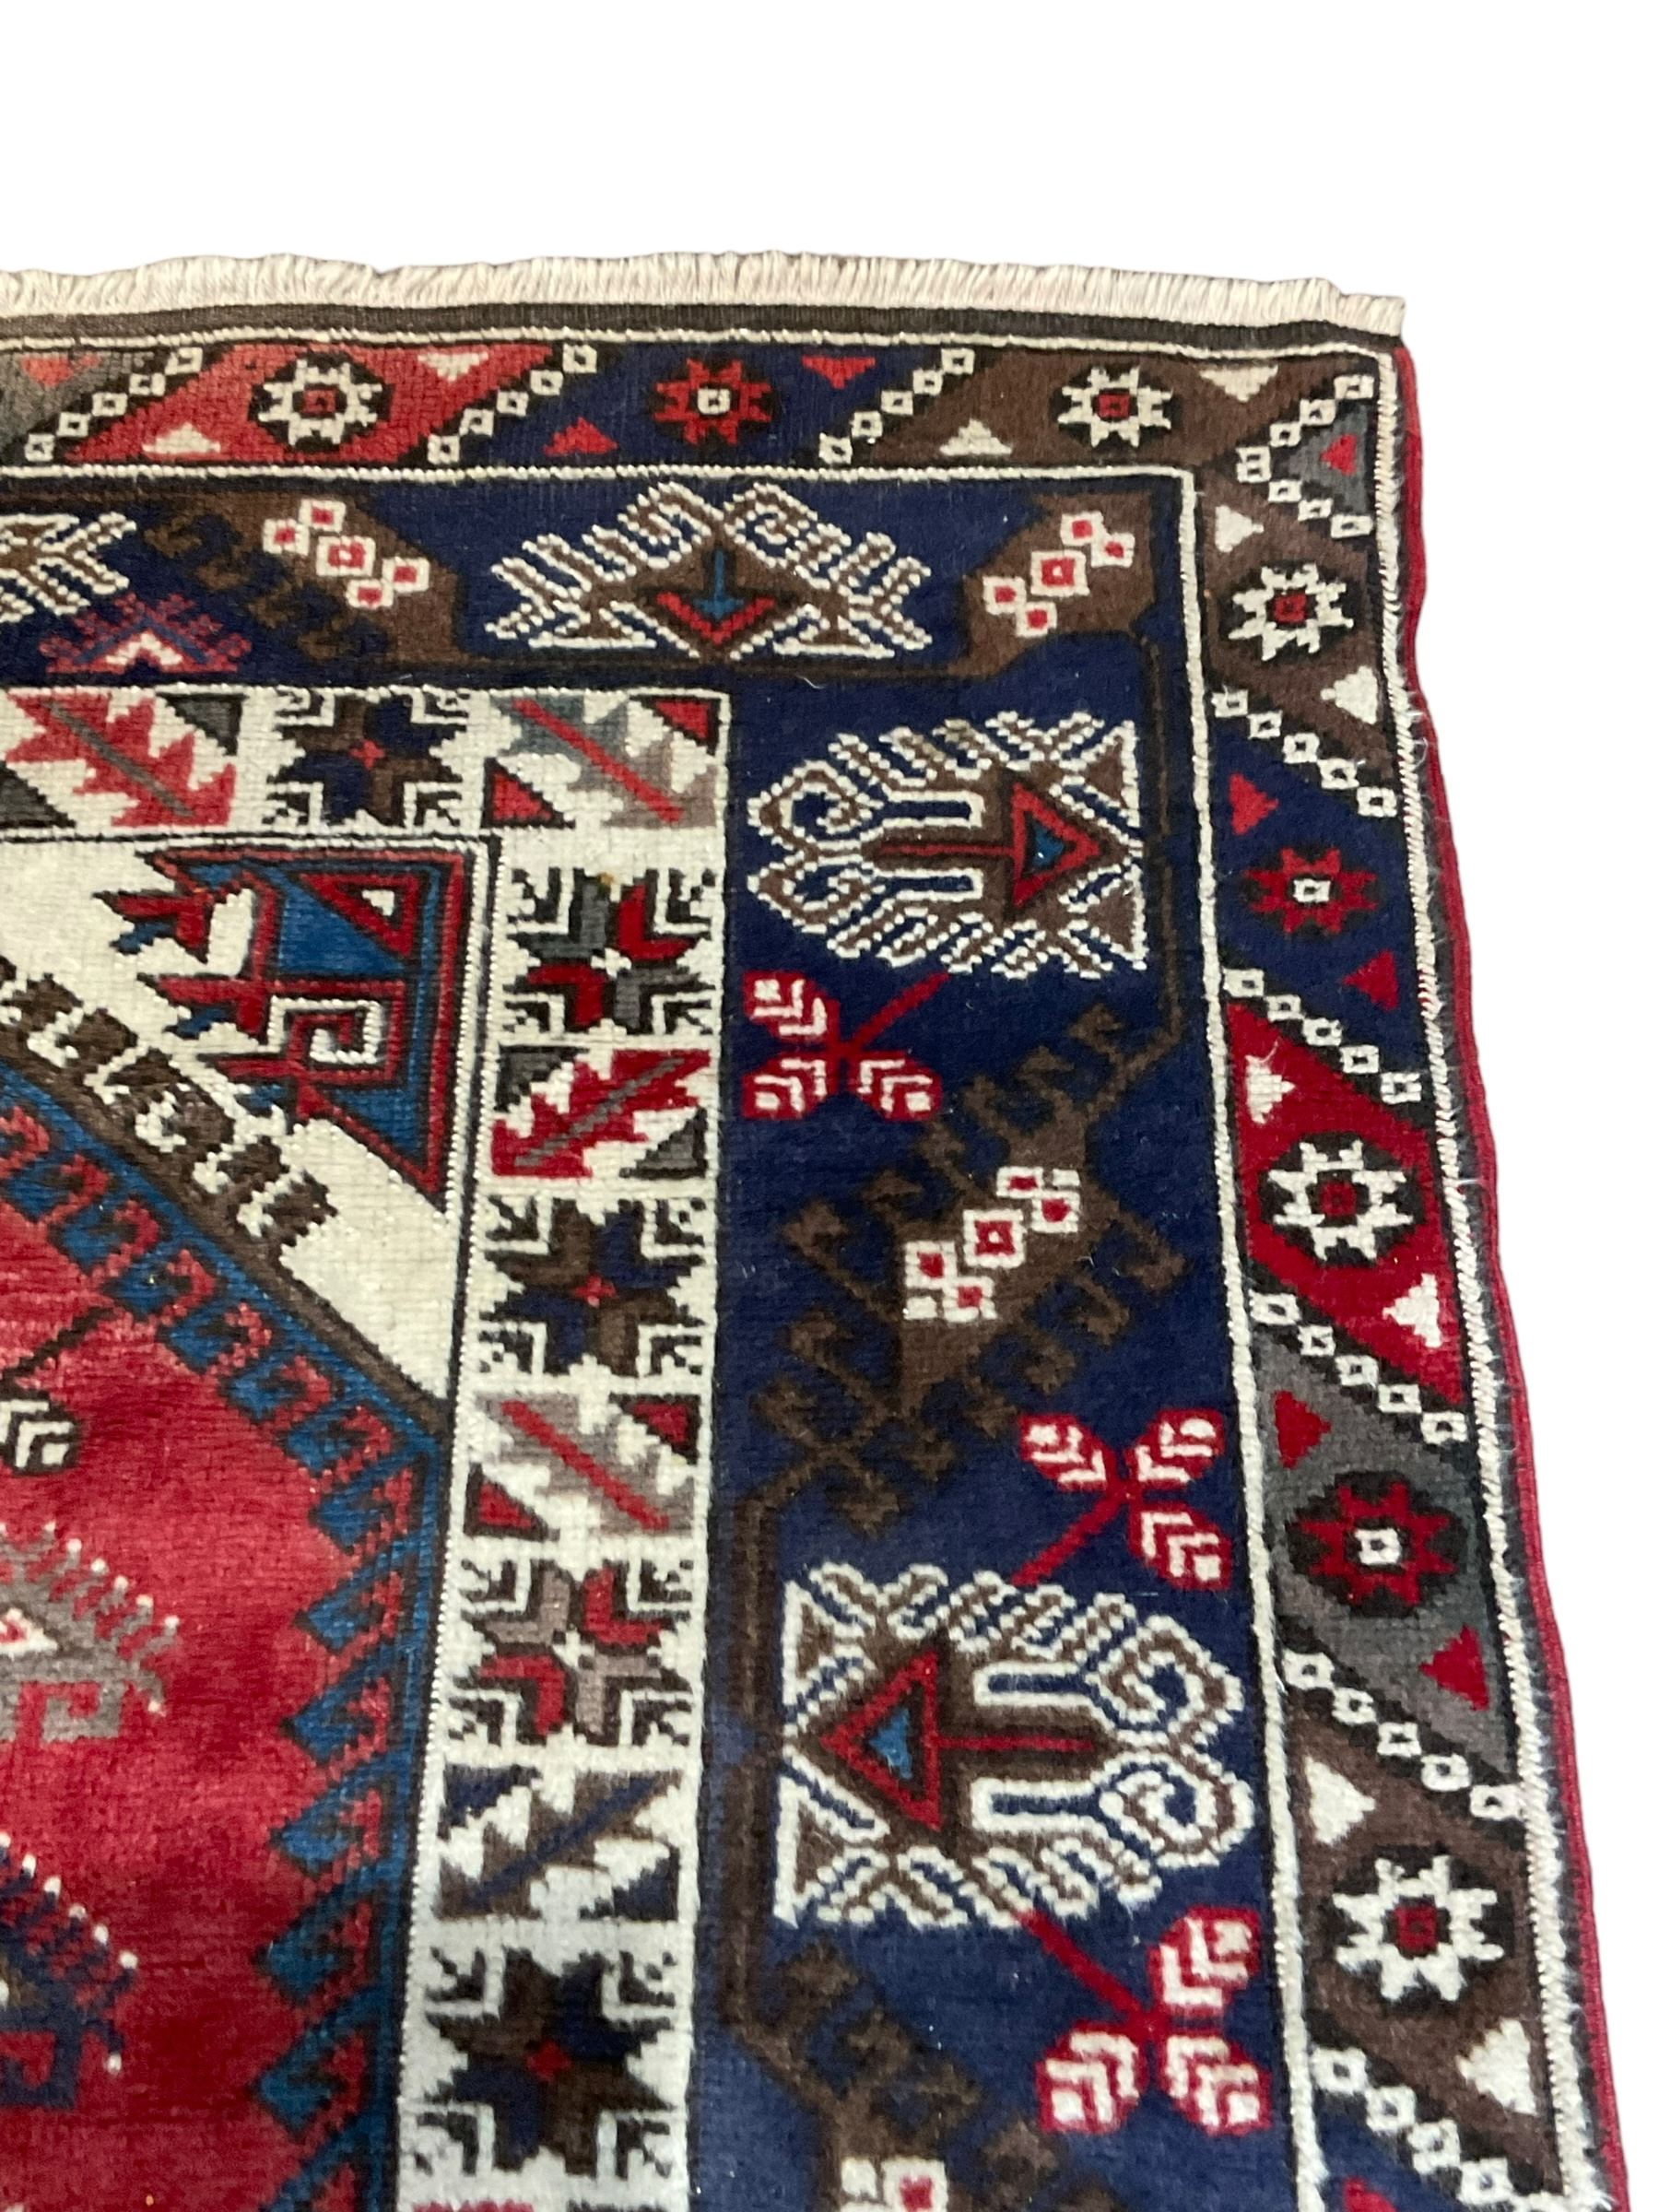 Turkish Dosemealti ivory blue and red ground rug - Image 3 of 7